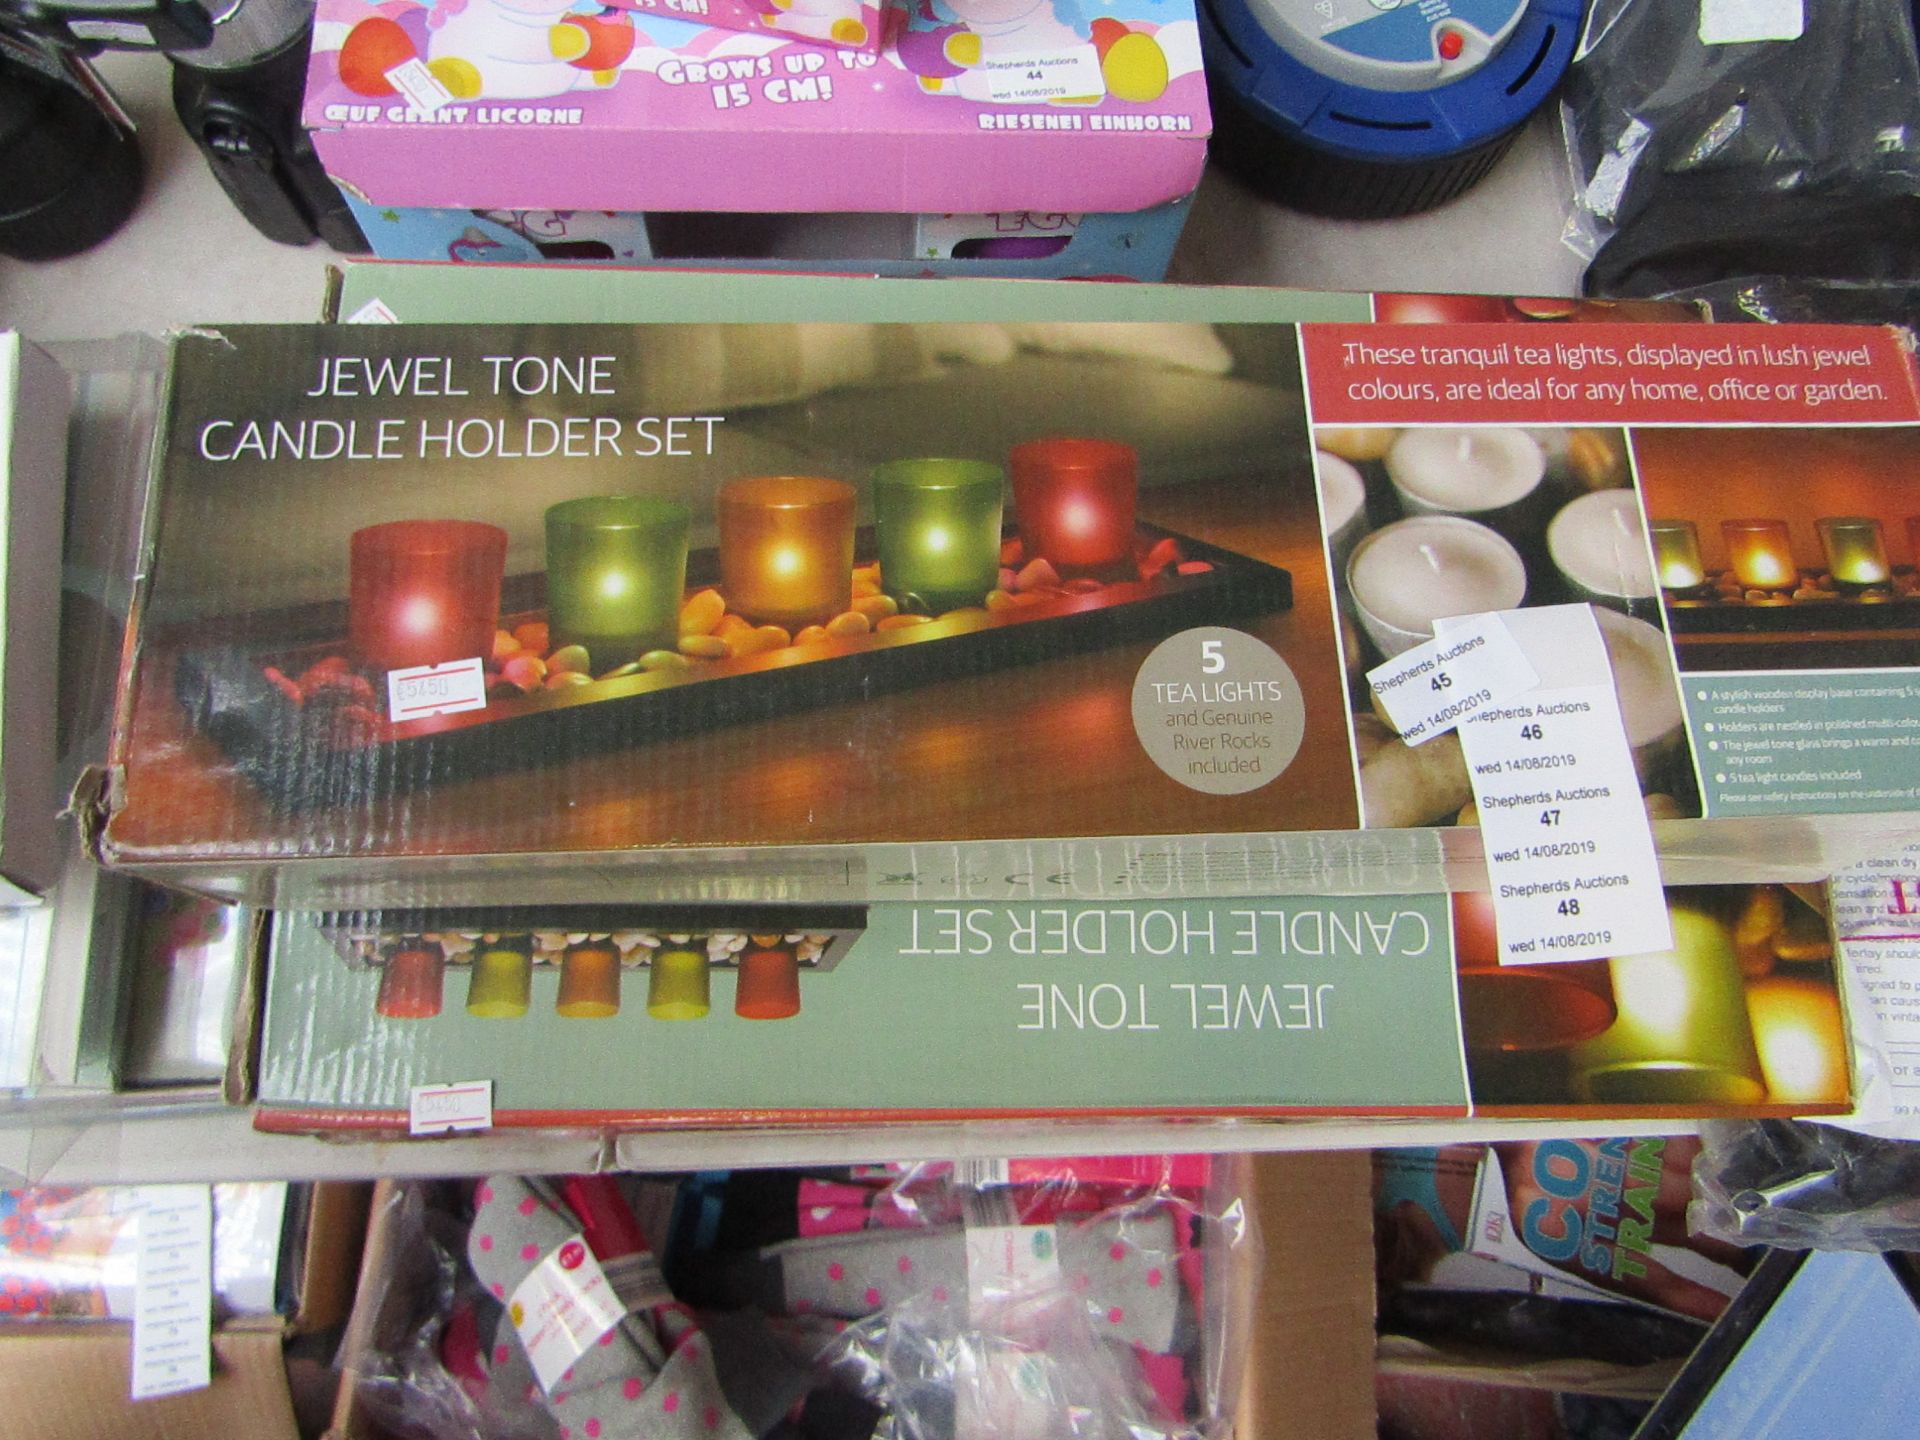 Jewel Tone candle holder set, new and boxed.